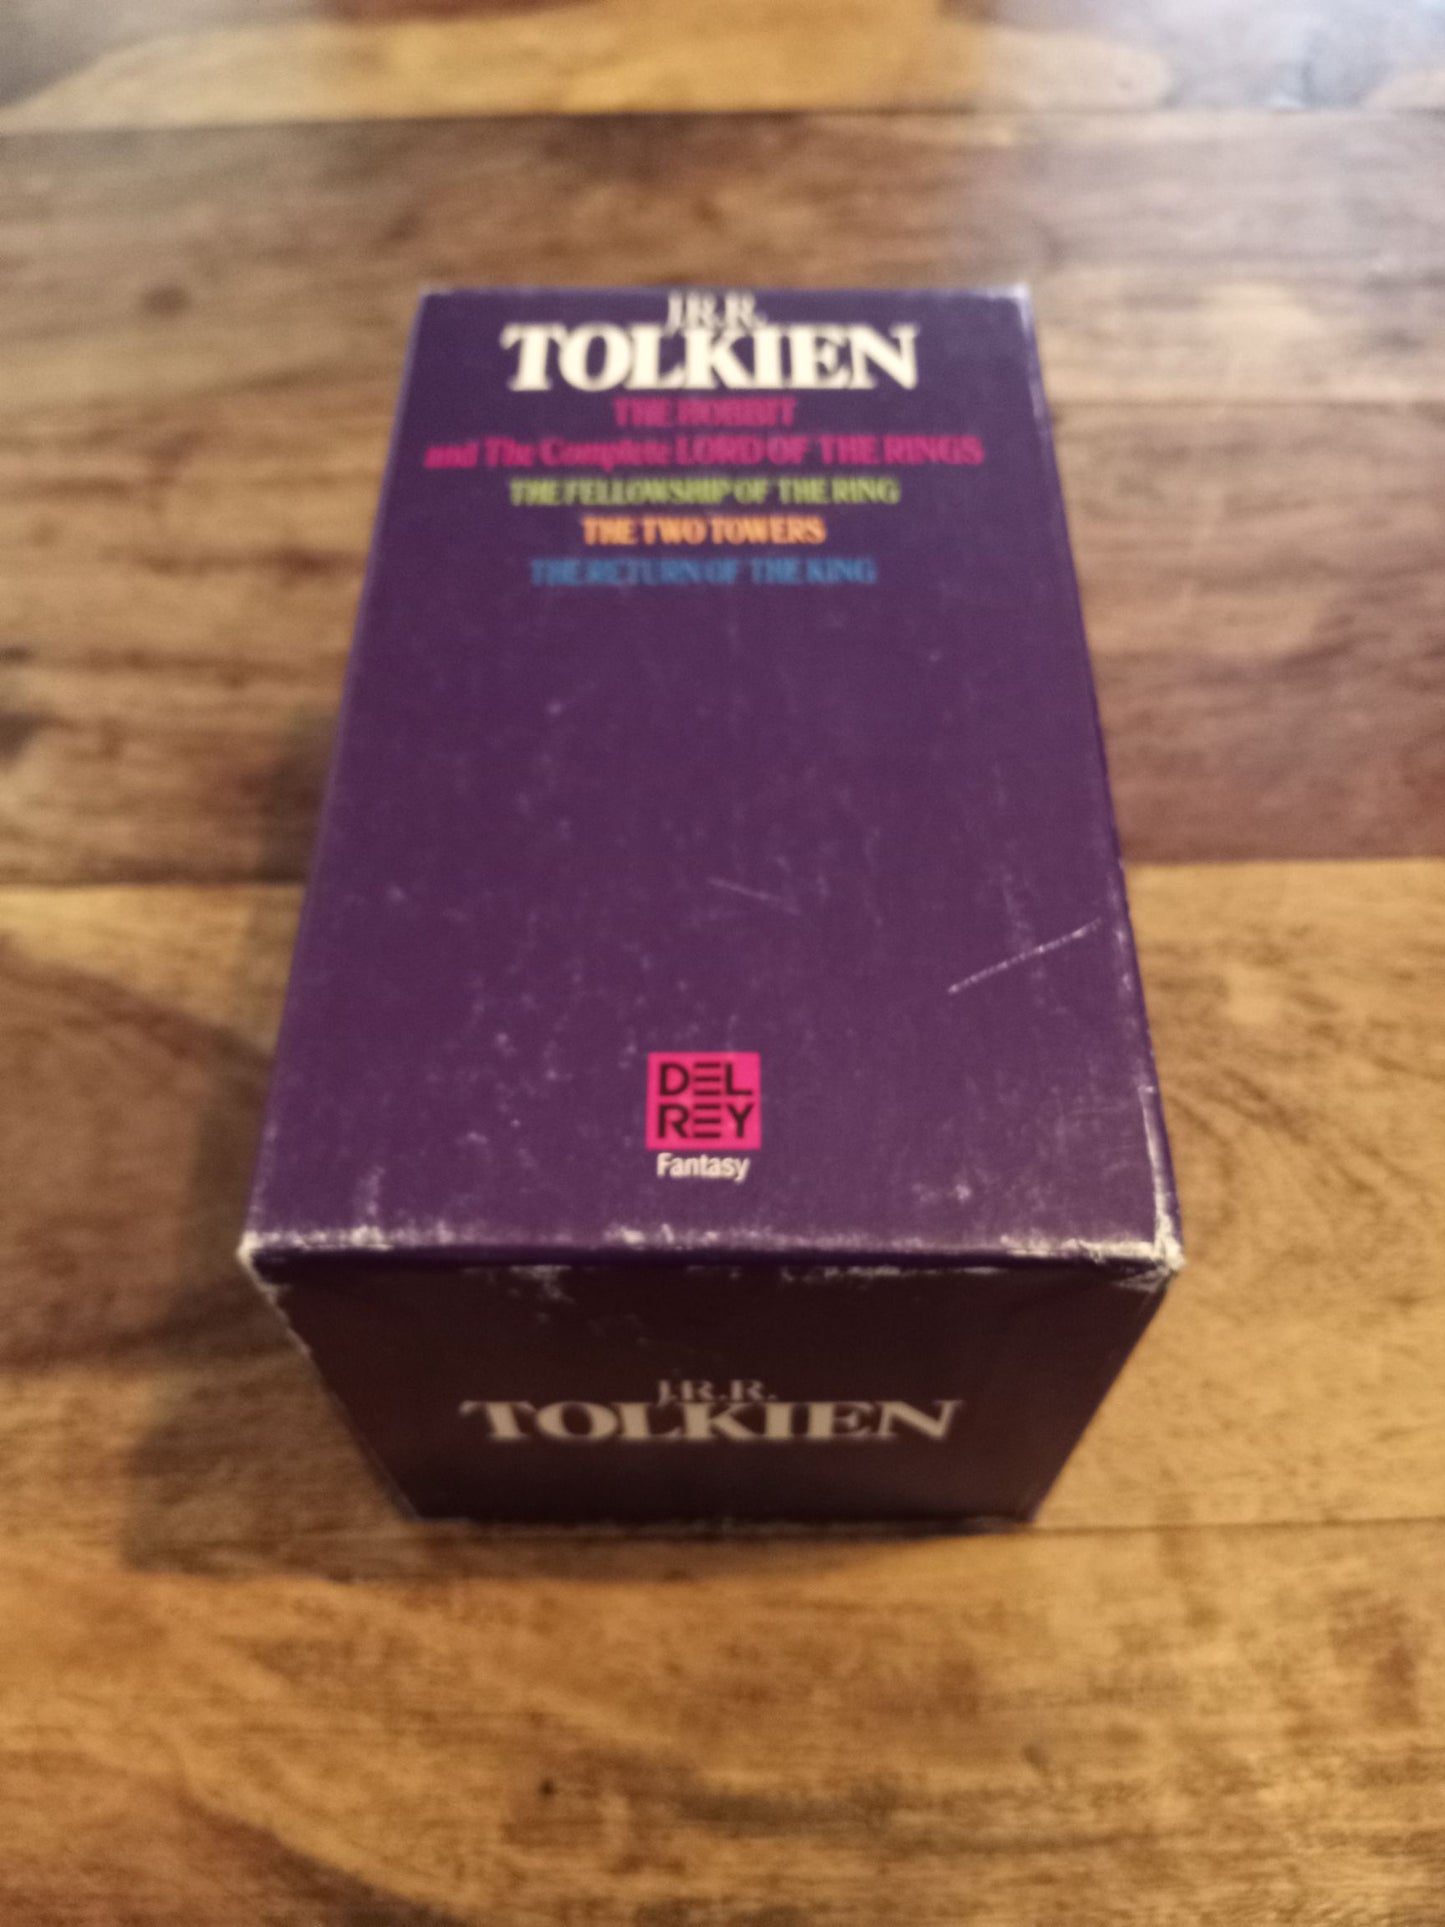 J.R.R. Tolkien Vintage The Lord of the Rings - The Hobbit Box Set 1983